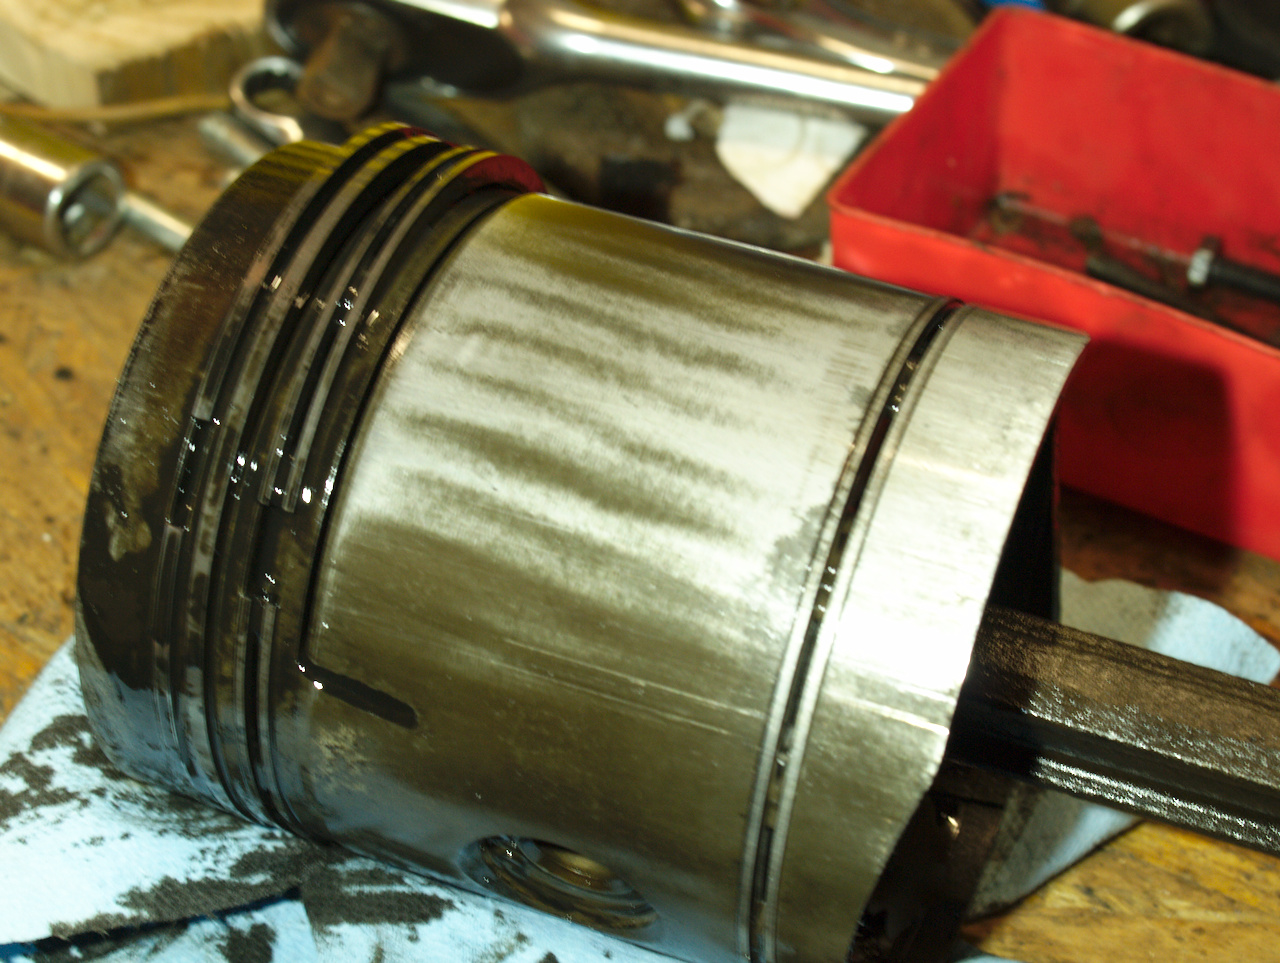 A piston laying on a workbench, showing machining marks that put
a slot into the skirt of the piston just below the compression
rings. The rest of the piston skirt is solid.